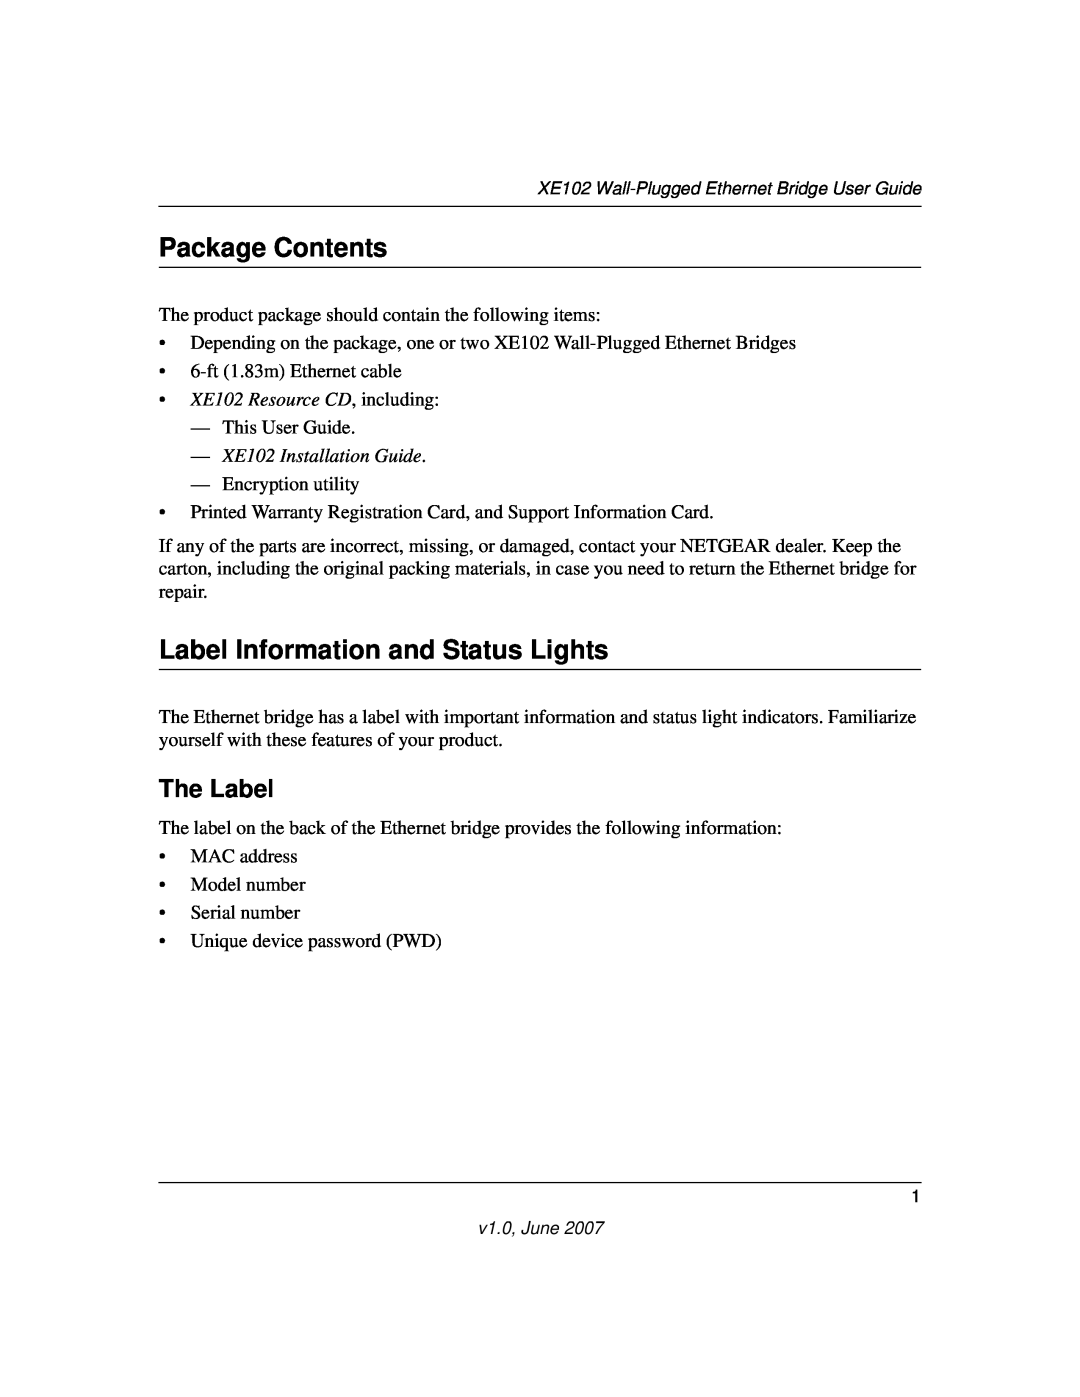 NETGEAR manual Package Contents, Label Information and Status Lights, The Label, XE102 Resource CD, including 